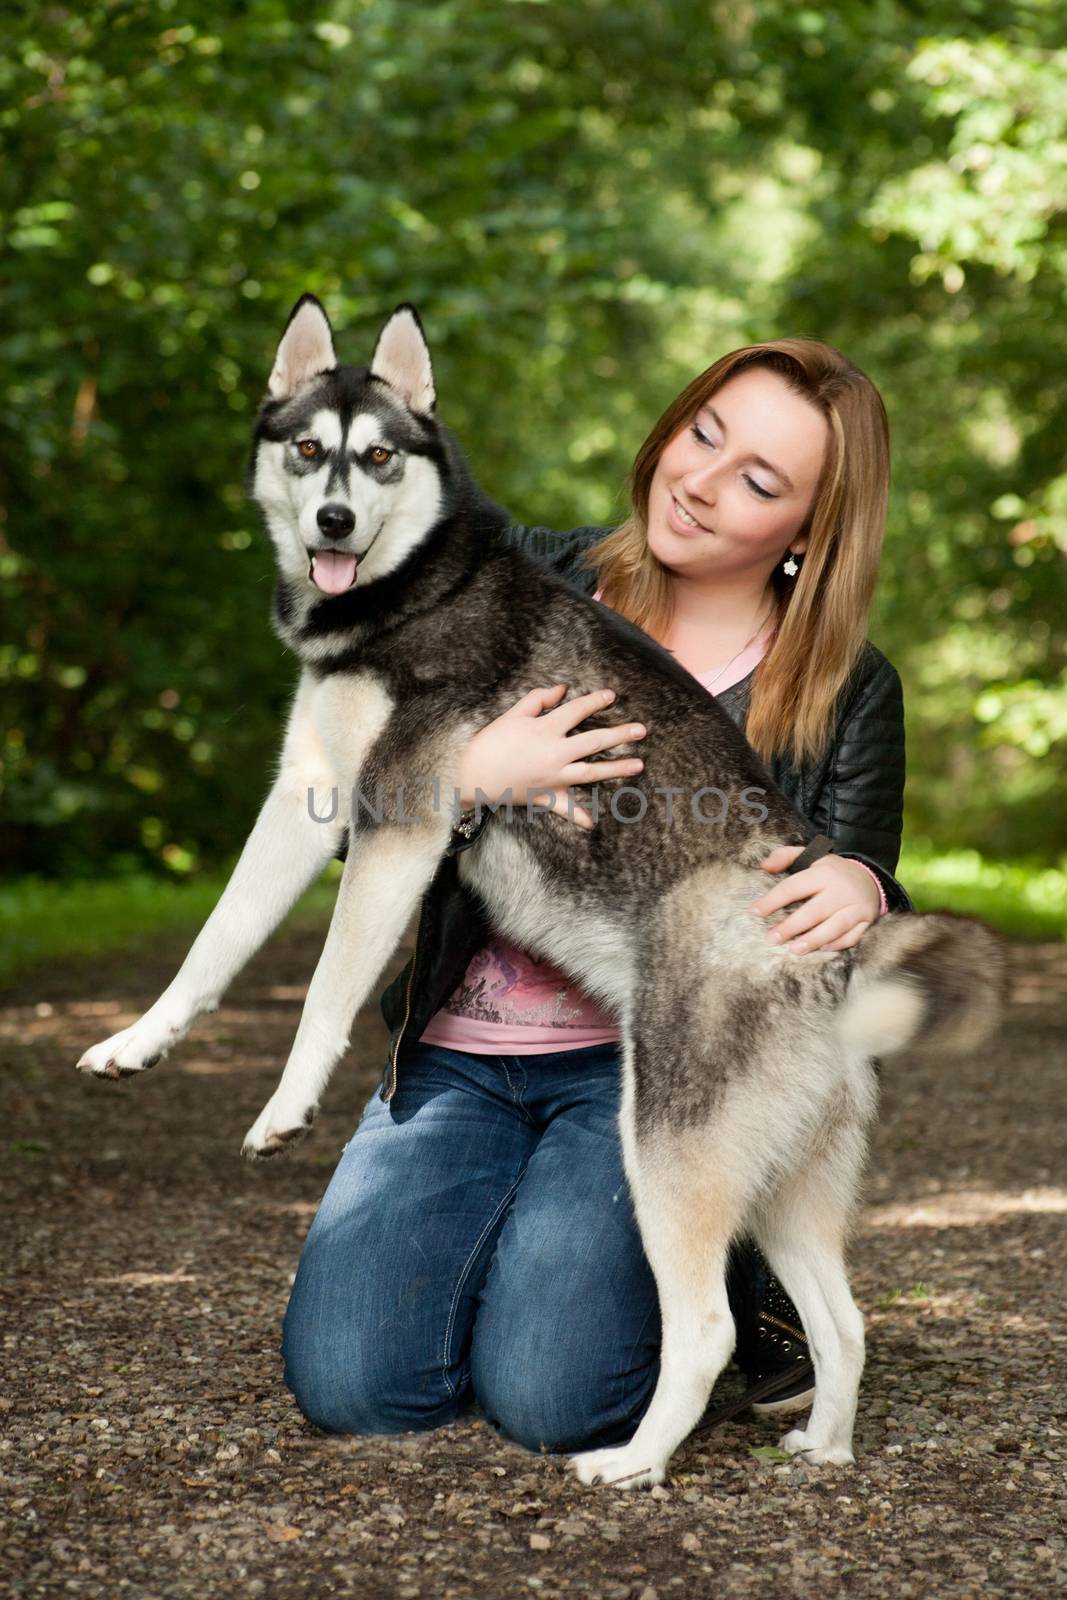 Bond girl and her husky by DNFStyle